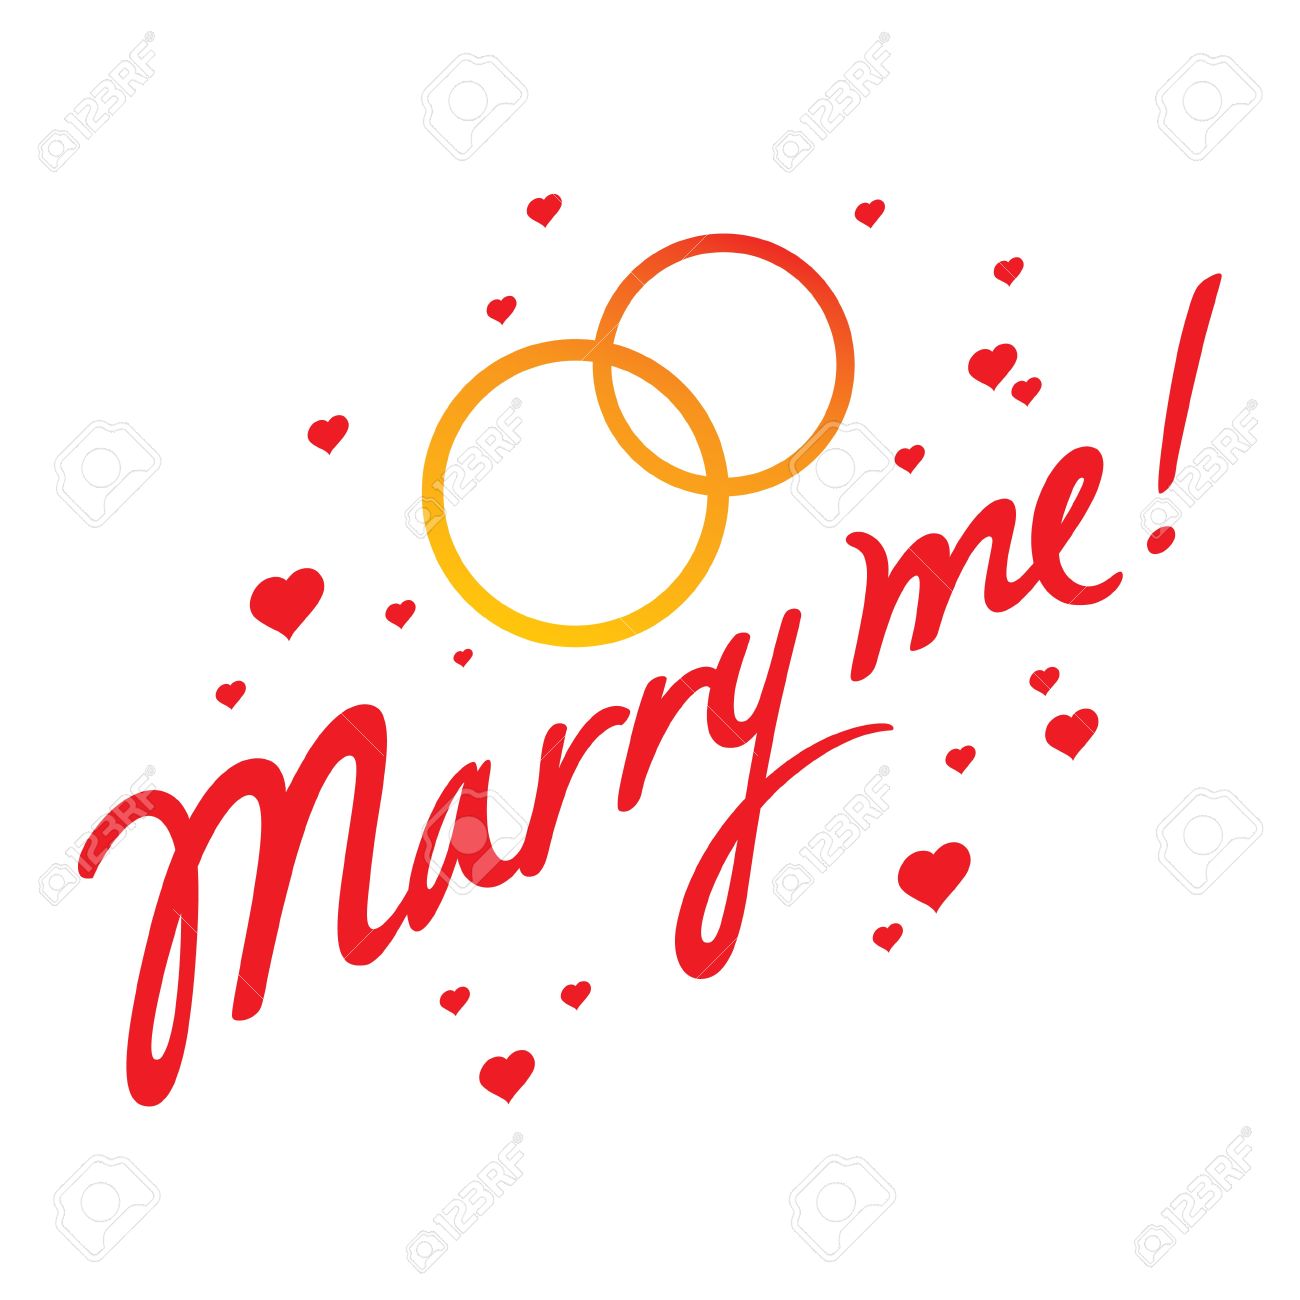 Marry Me Image